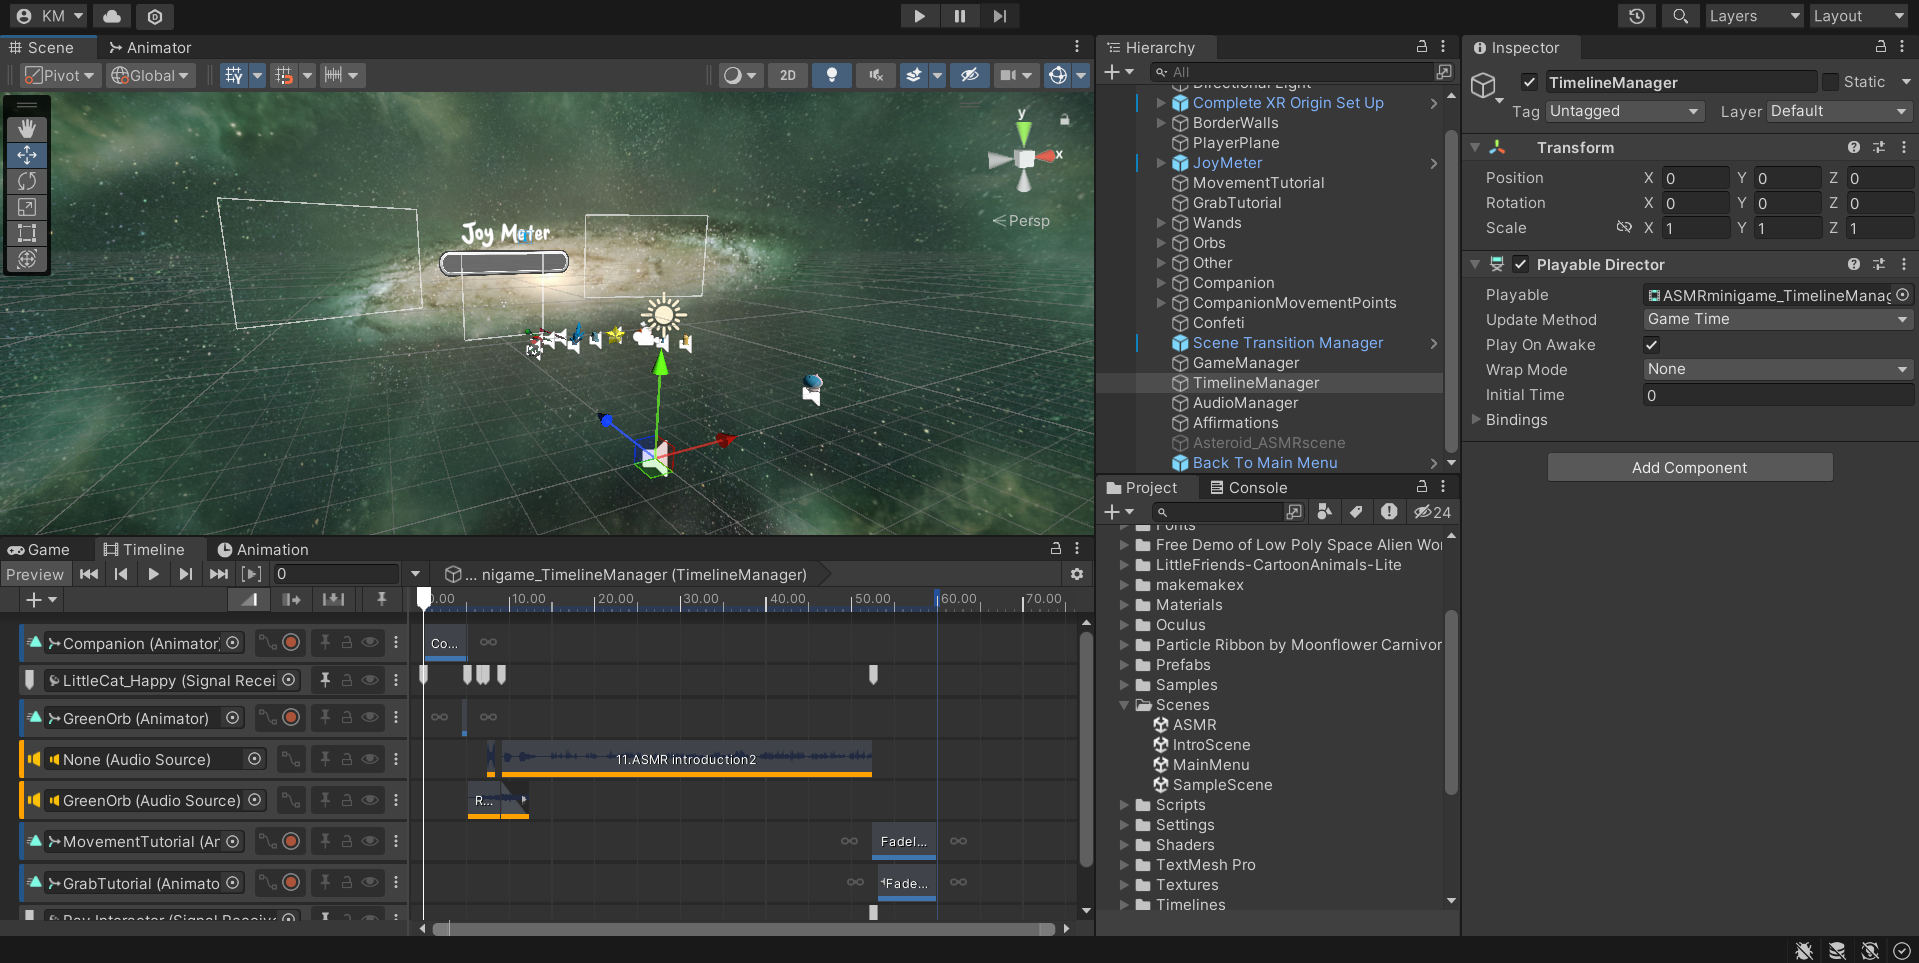 A screenshot of the Unity Project during development